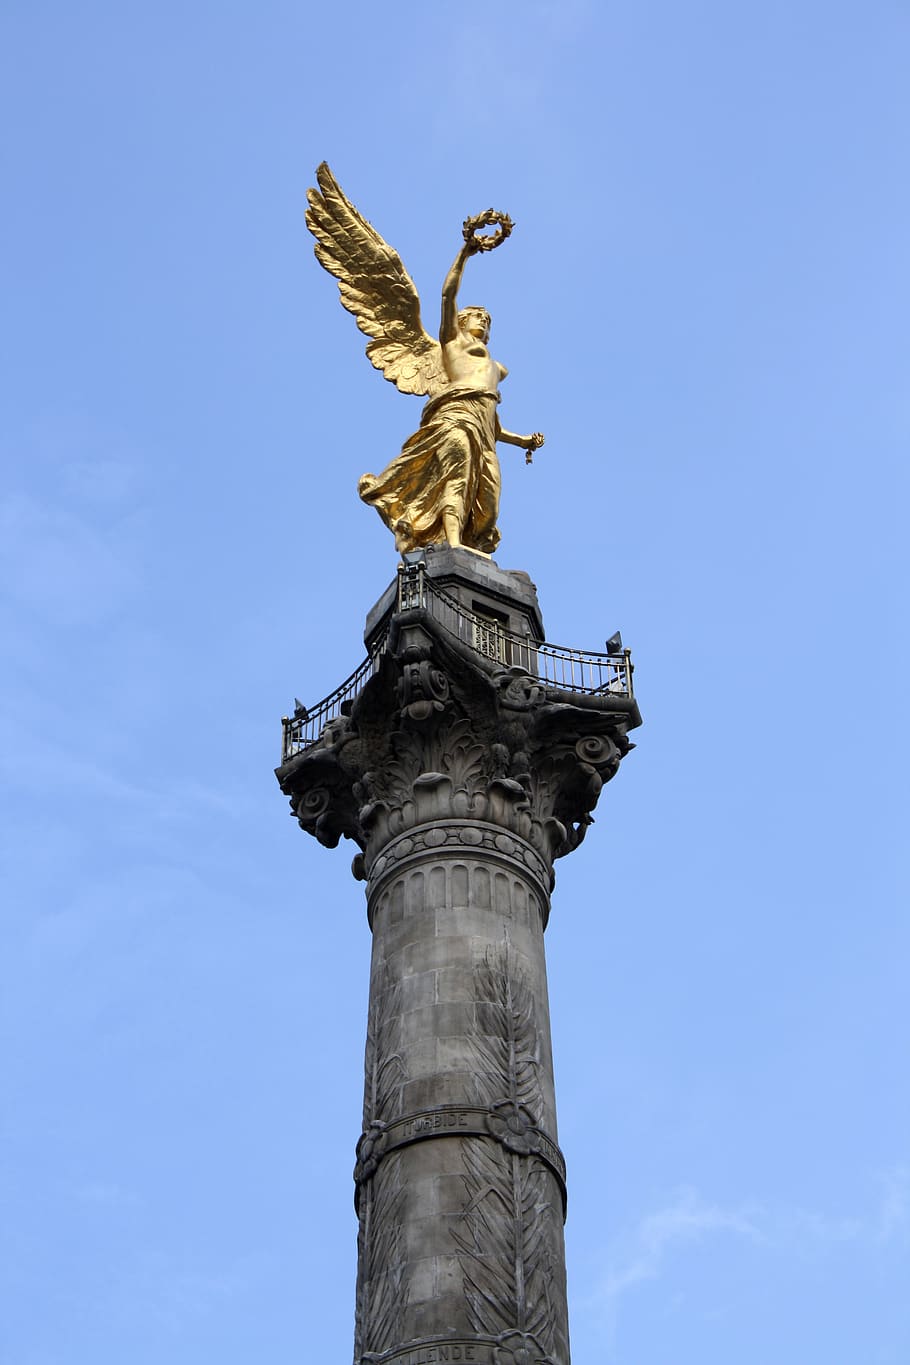 mexico, sky, angel of independence, sculture, outdoors, tourism, sculpture, art and craft, statue, low angle view